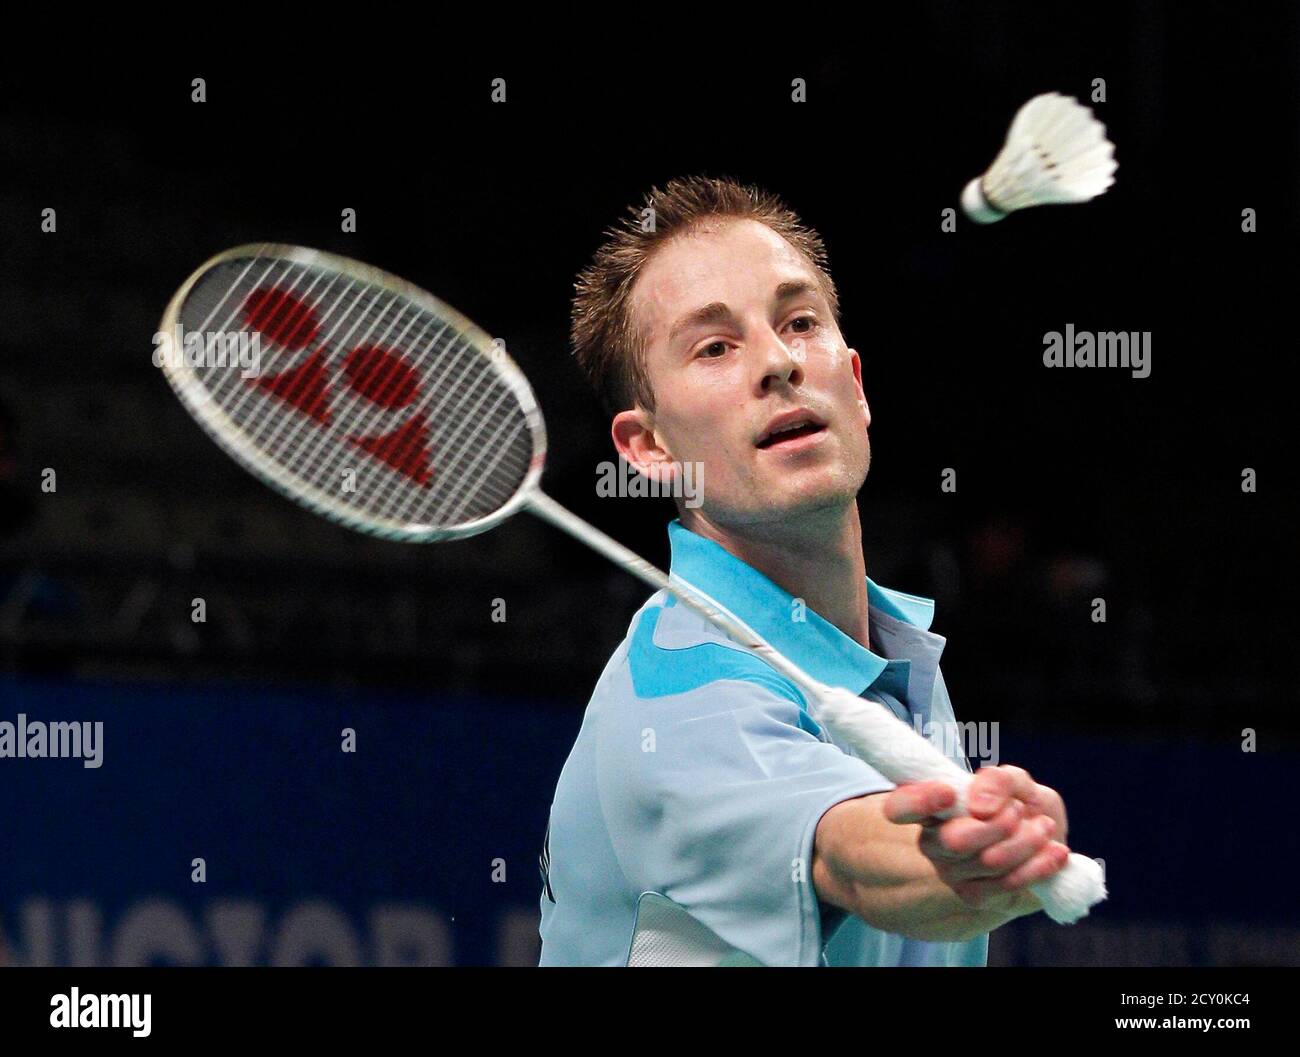 Denmark's Peter Hoeg Gade returns a shot to Malaysia's Lee Chong Wei in  their men's singles match in the preliminary round at the 2010 Badminton  World Federation Super Series finals at the